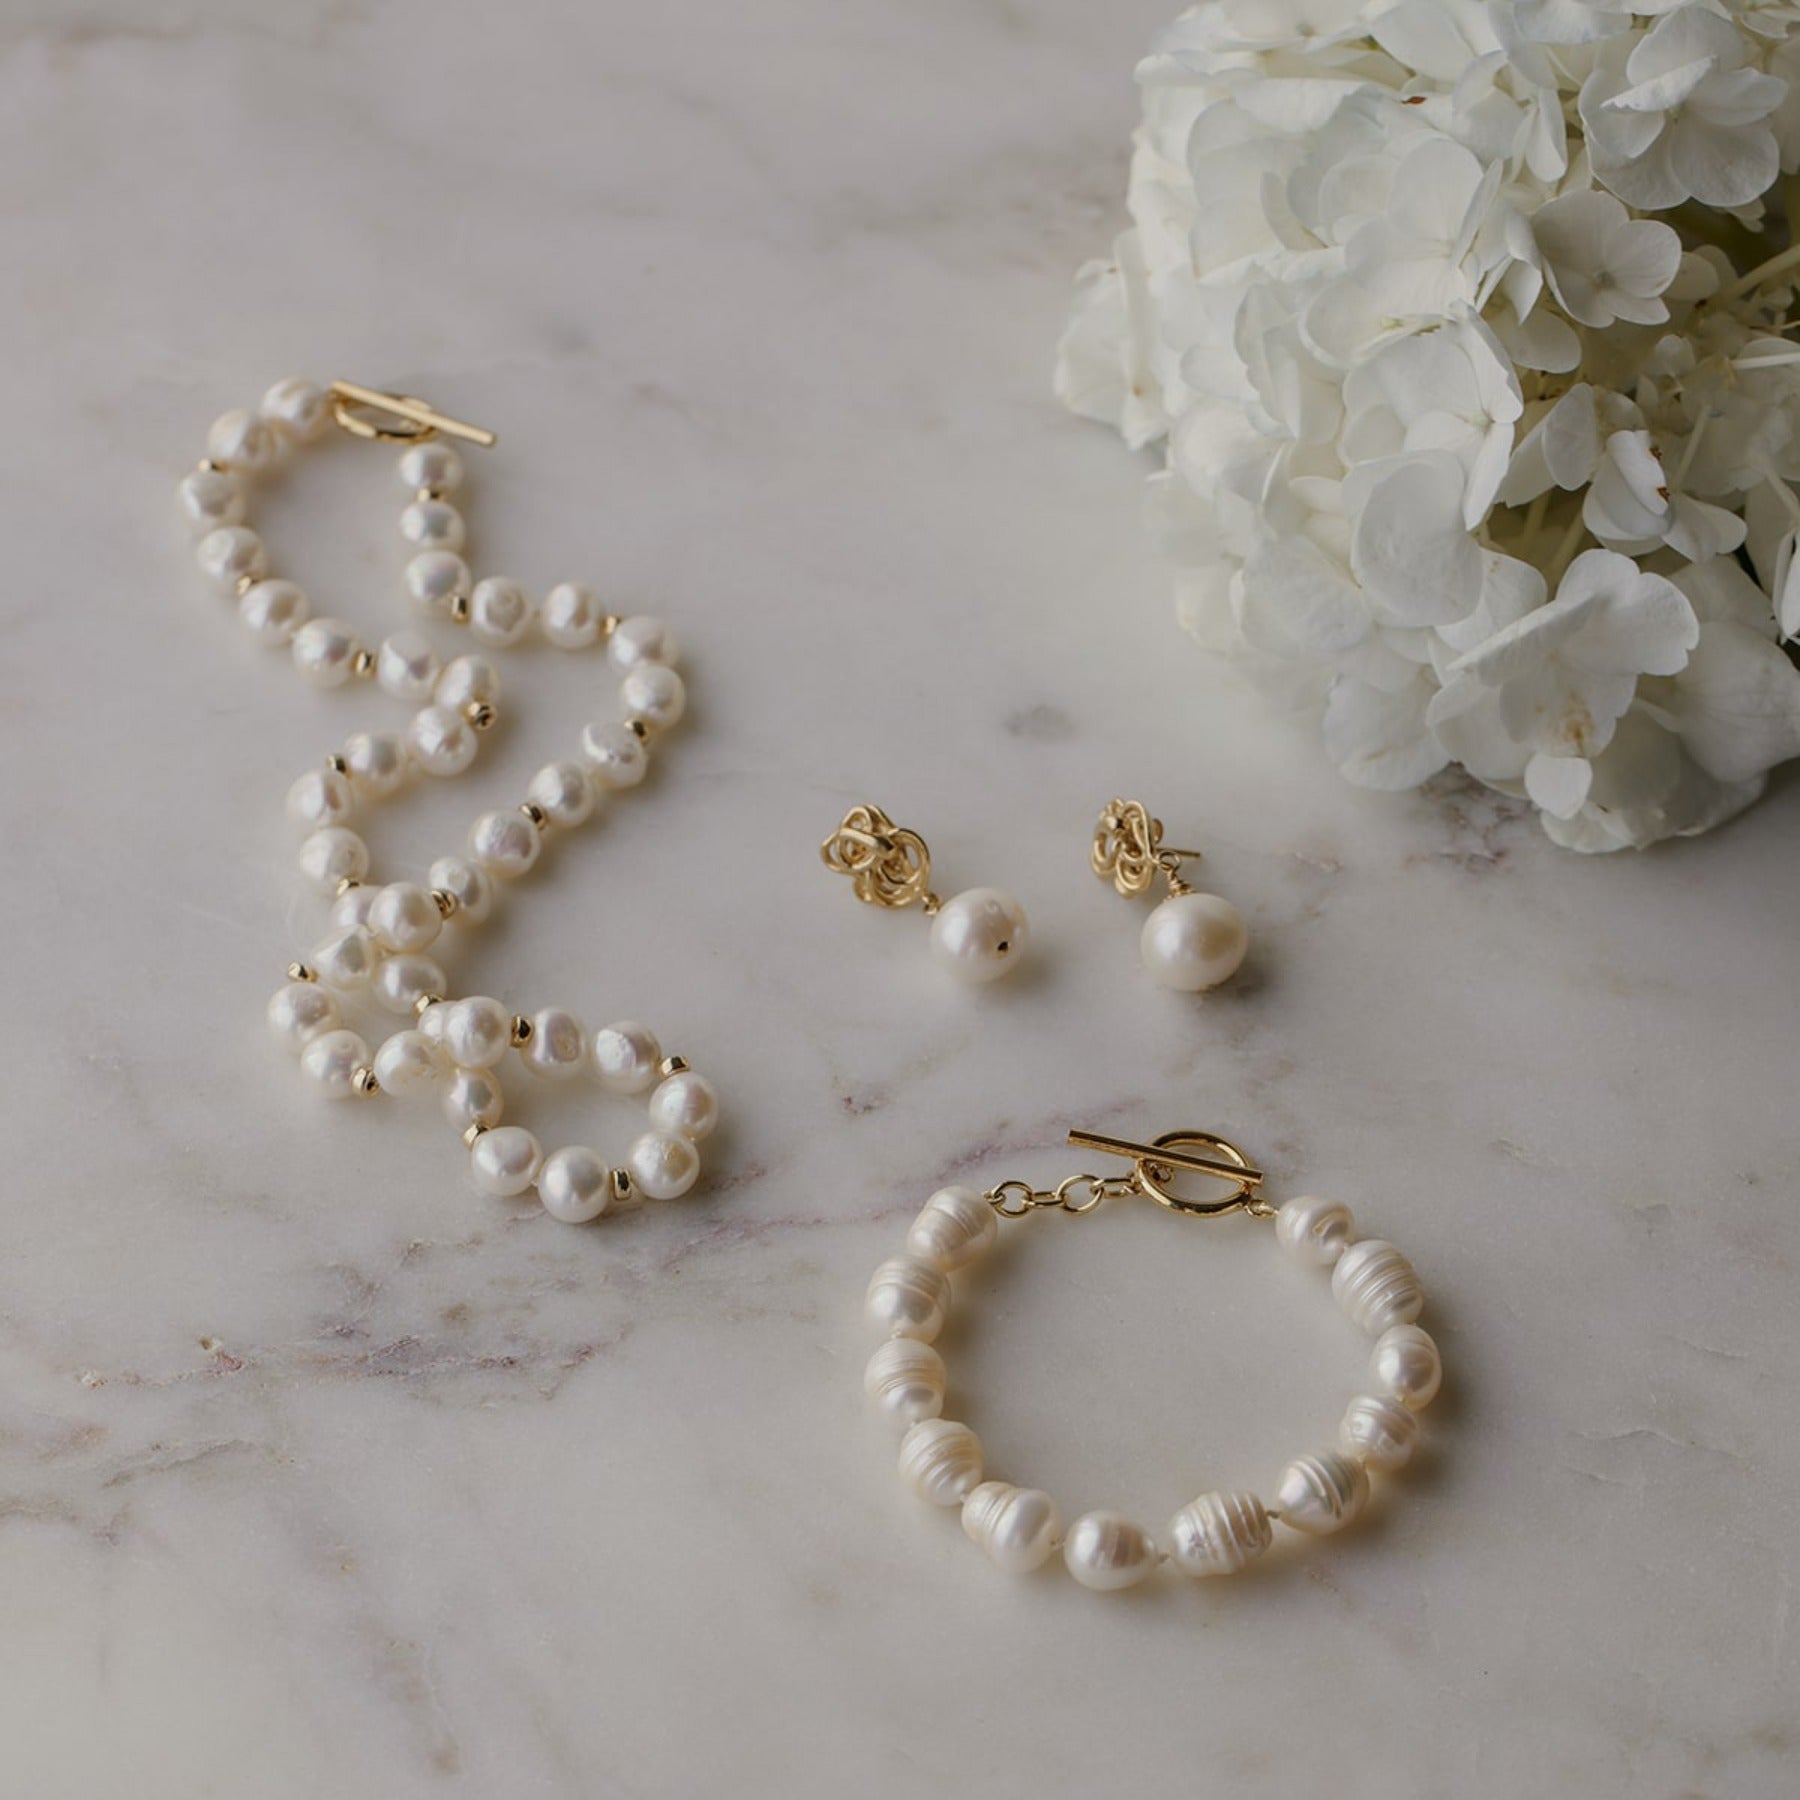 Freshwater cultured button pearl necklace with 14k gold-filled beads interspersed and finished with a 14k gold-filled toggle clasp.